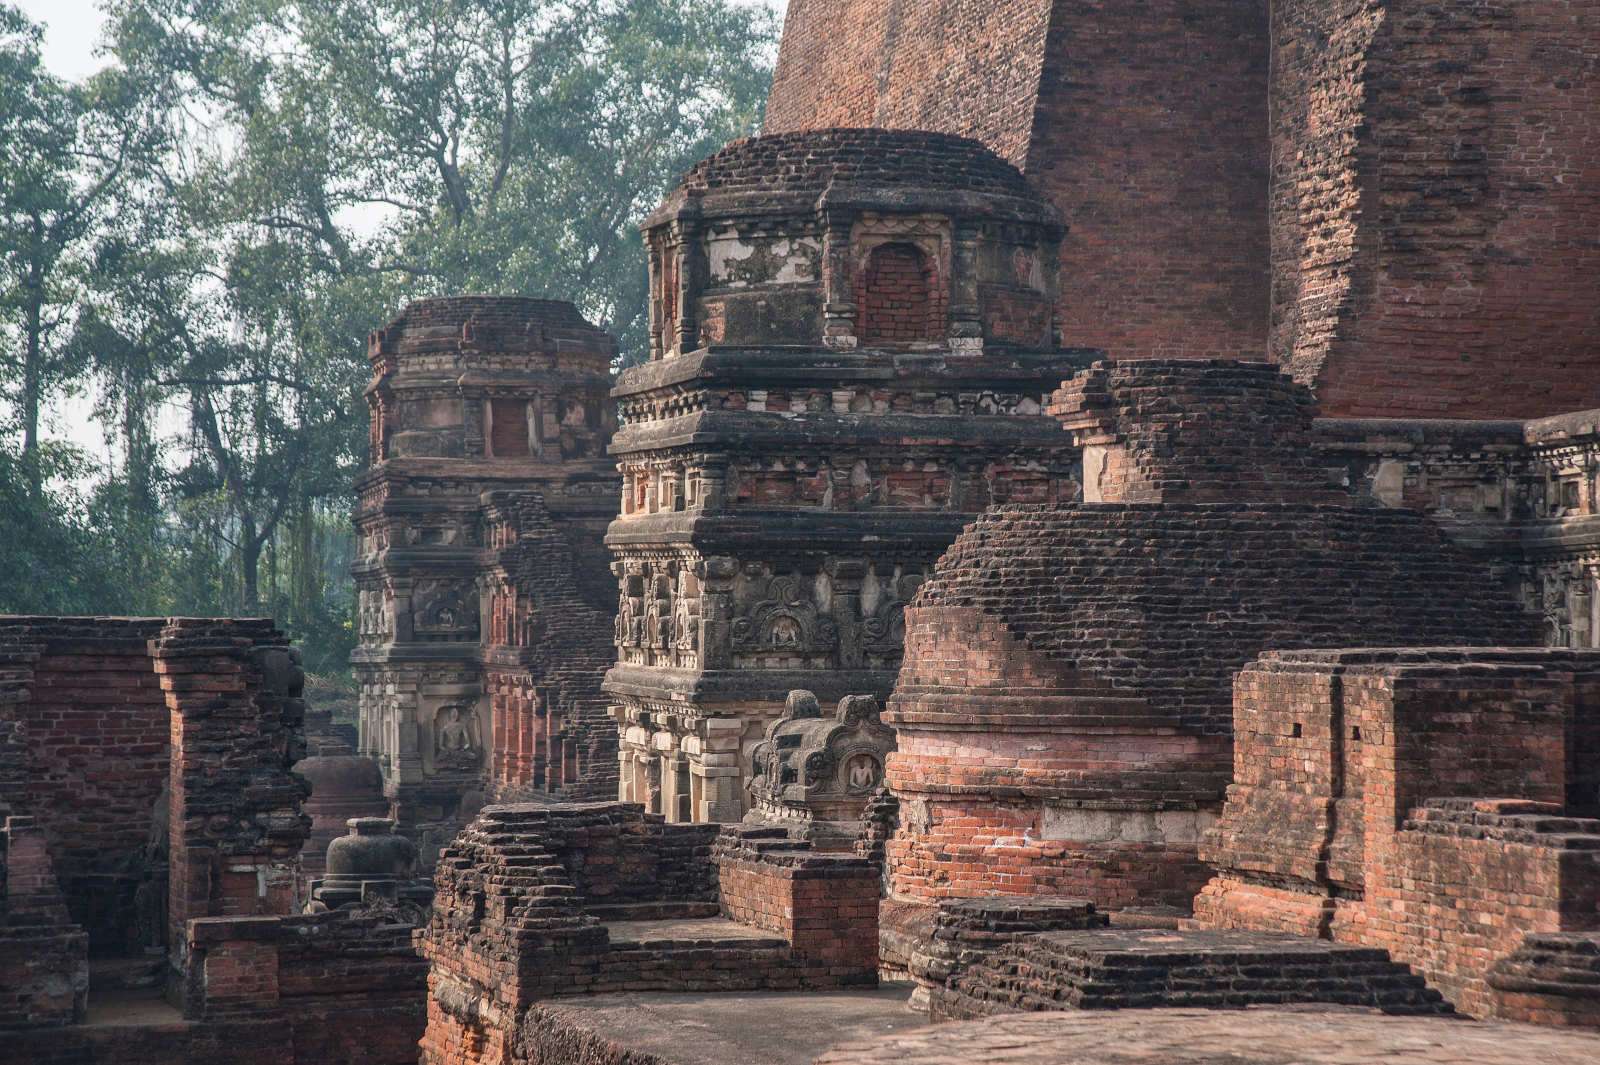 Ruins of the ancient Buddhist monastery Mahavihara , which was also a leading teaching institution under the Gupta Empire during the 5. and 6. century